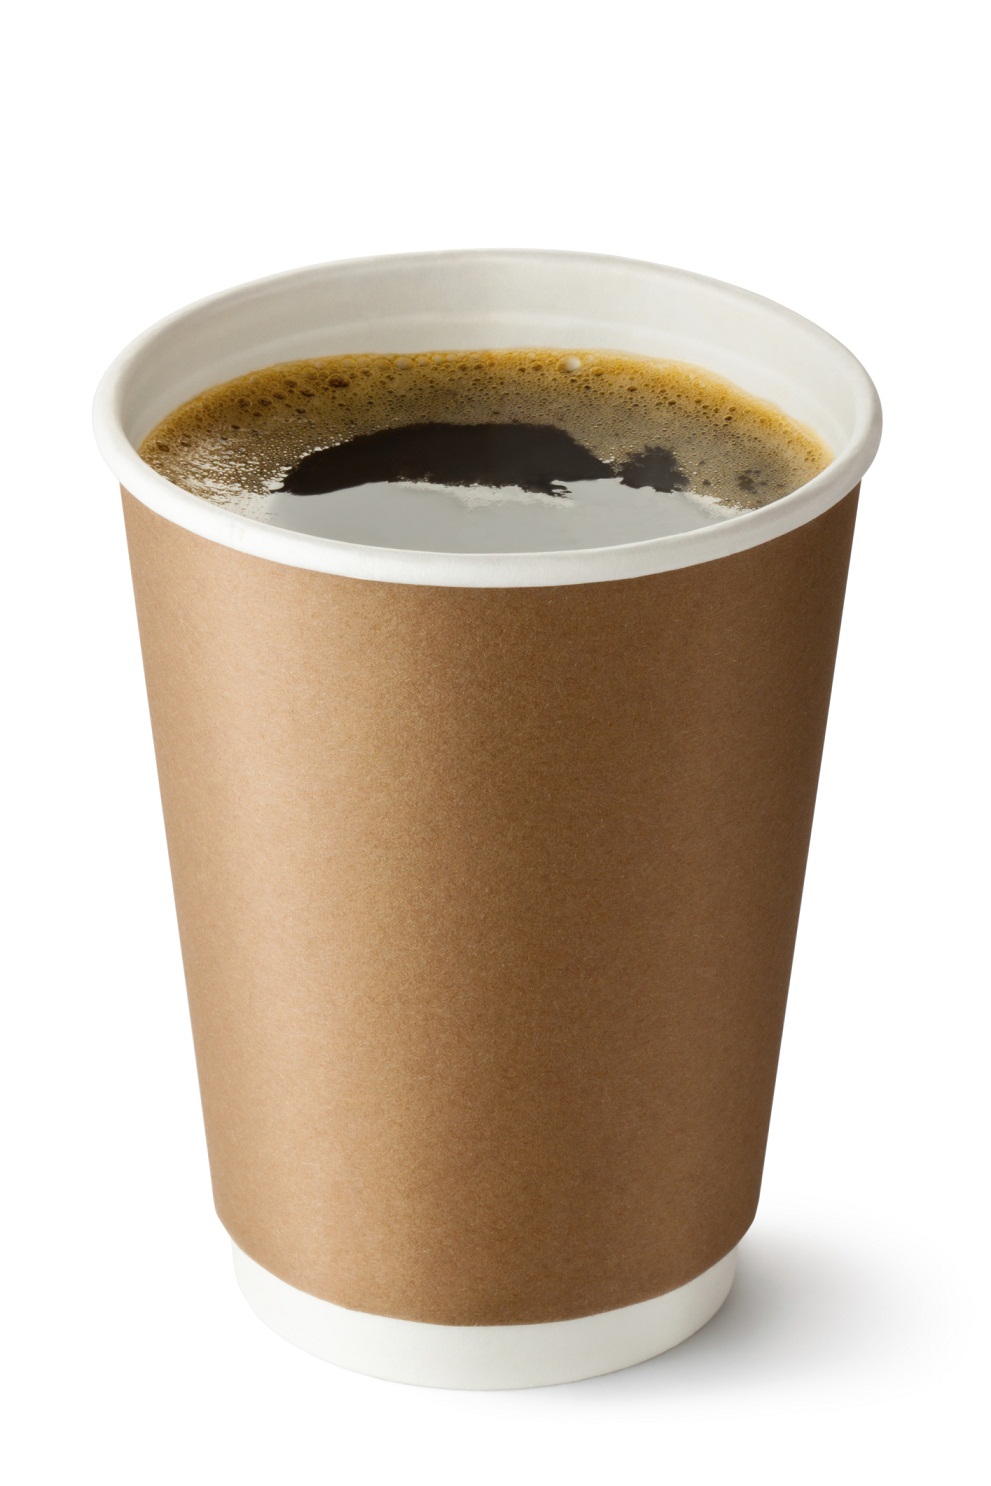 Take-out coffee in opened thermo cup